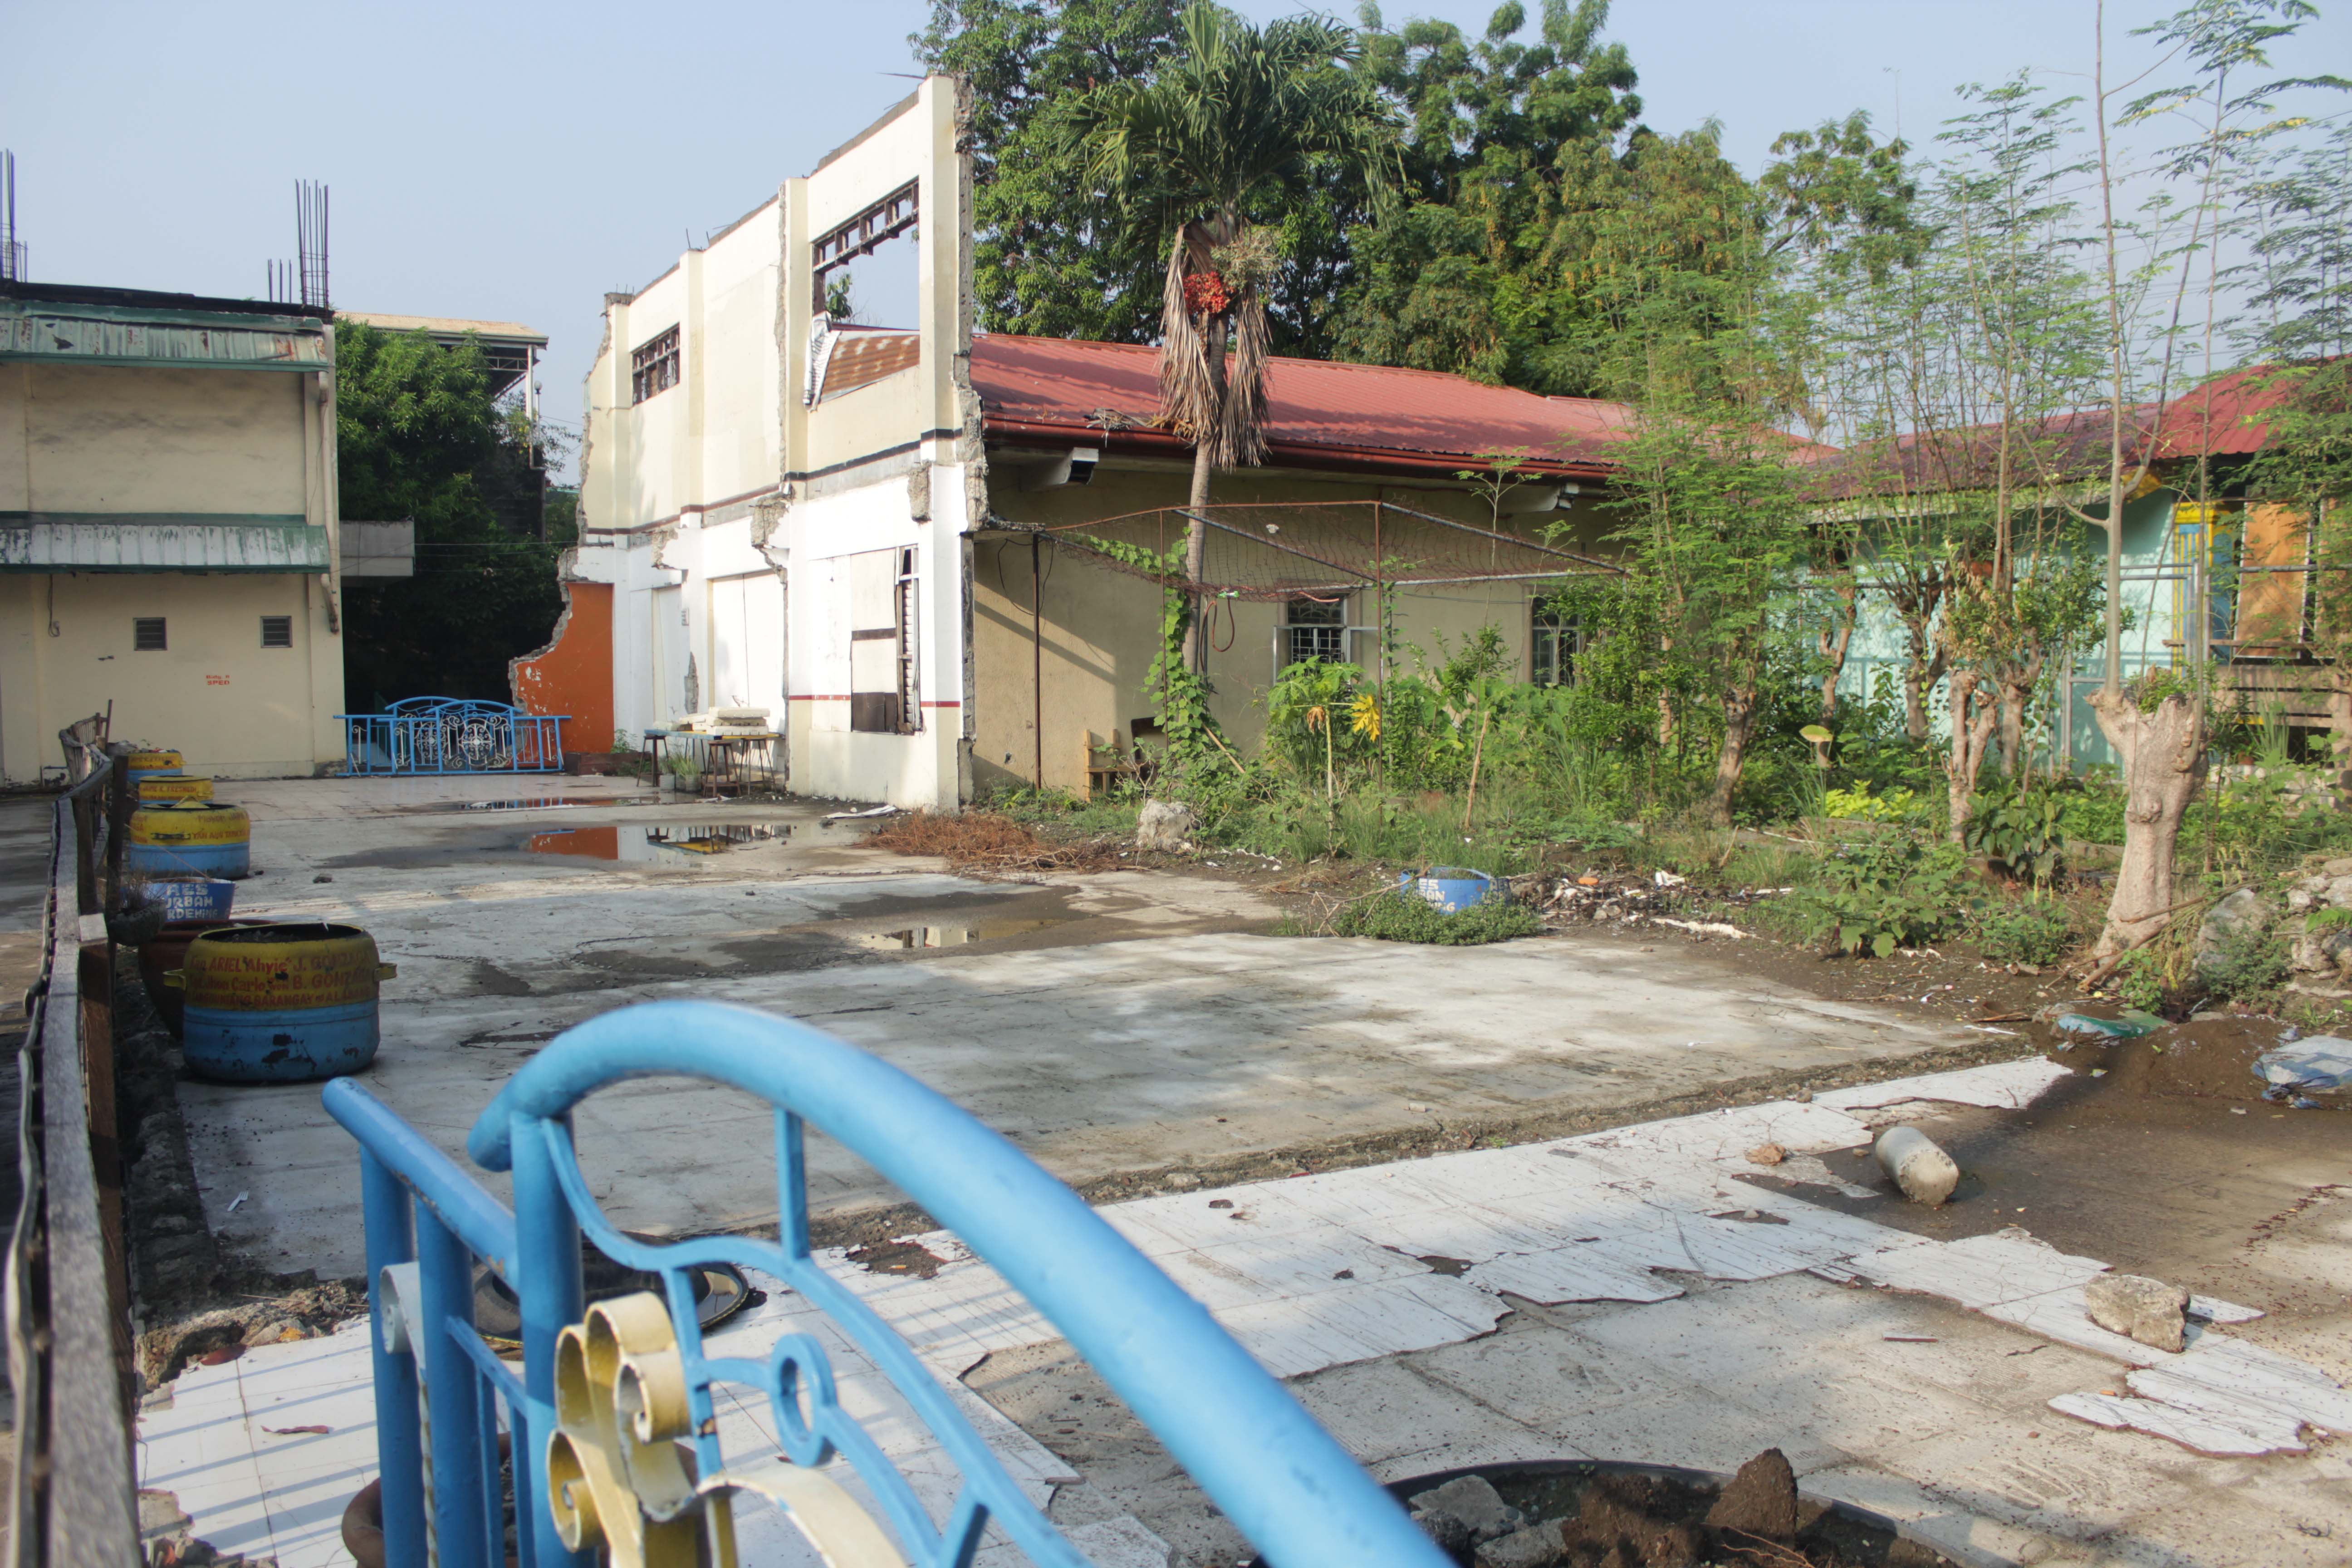 The West Valley Fault transected the Rodriguez building at the Alabang Elementary School from one end to another, compelling school authorities to demolish the structure in 2014.